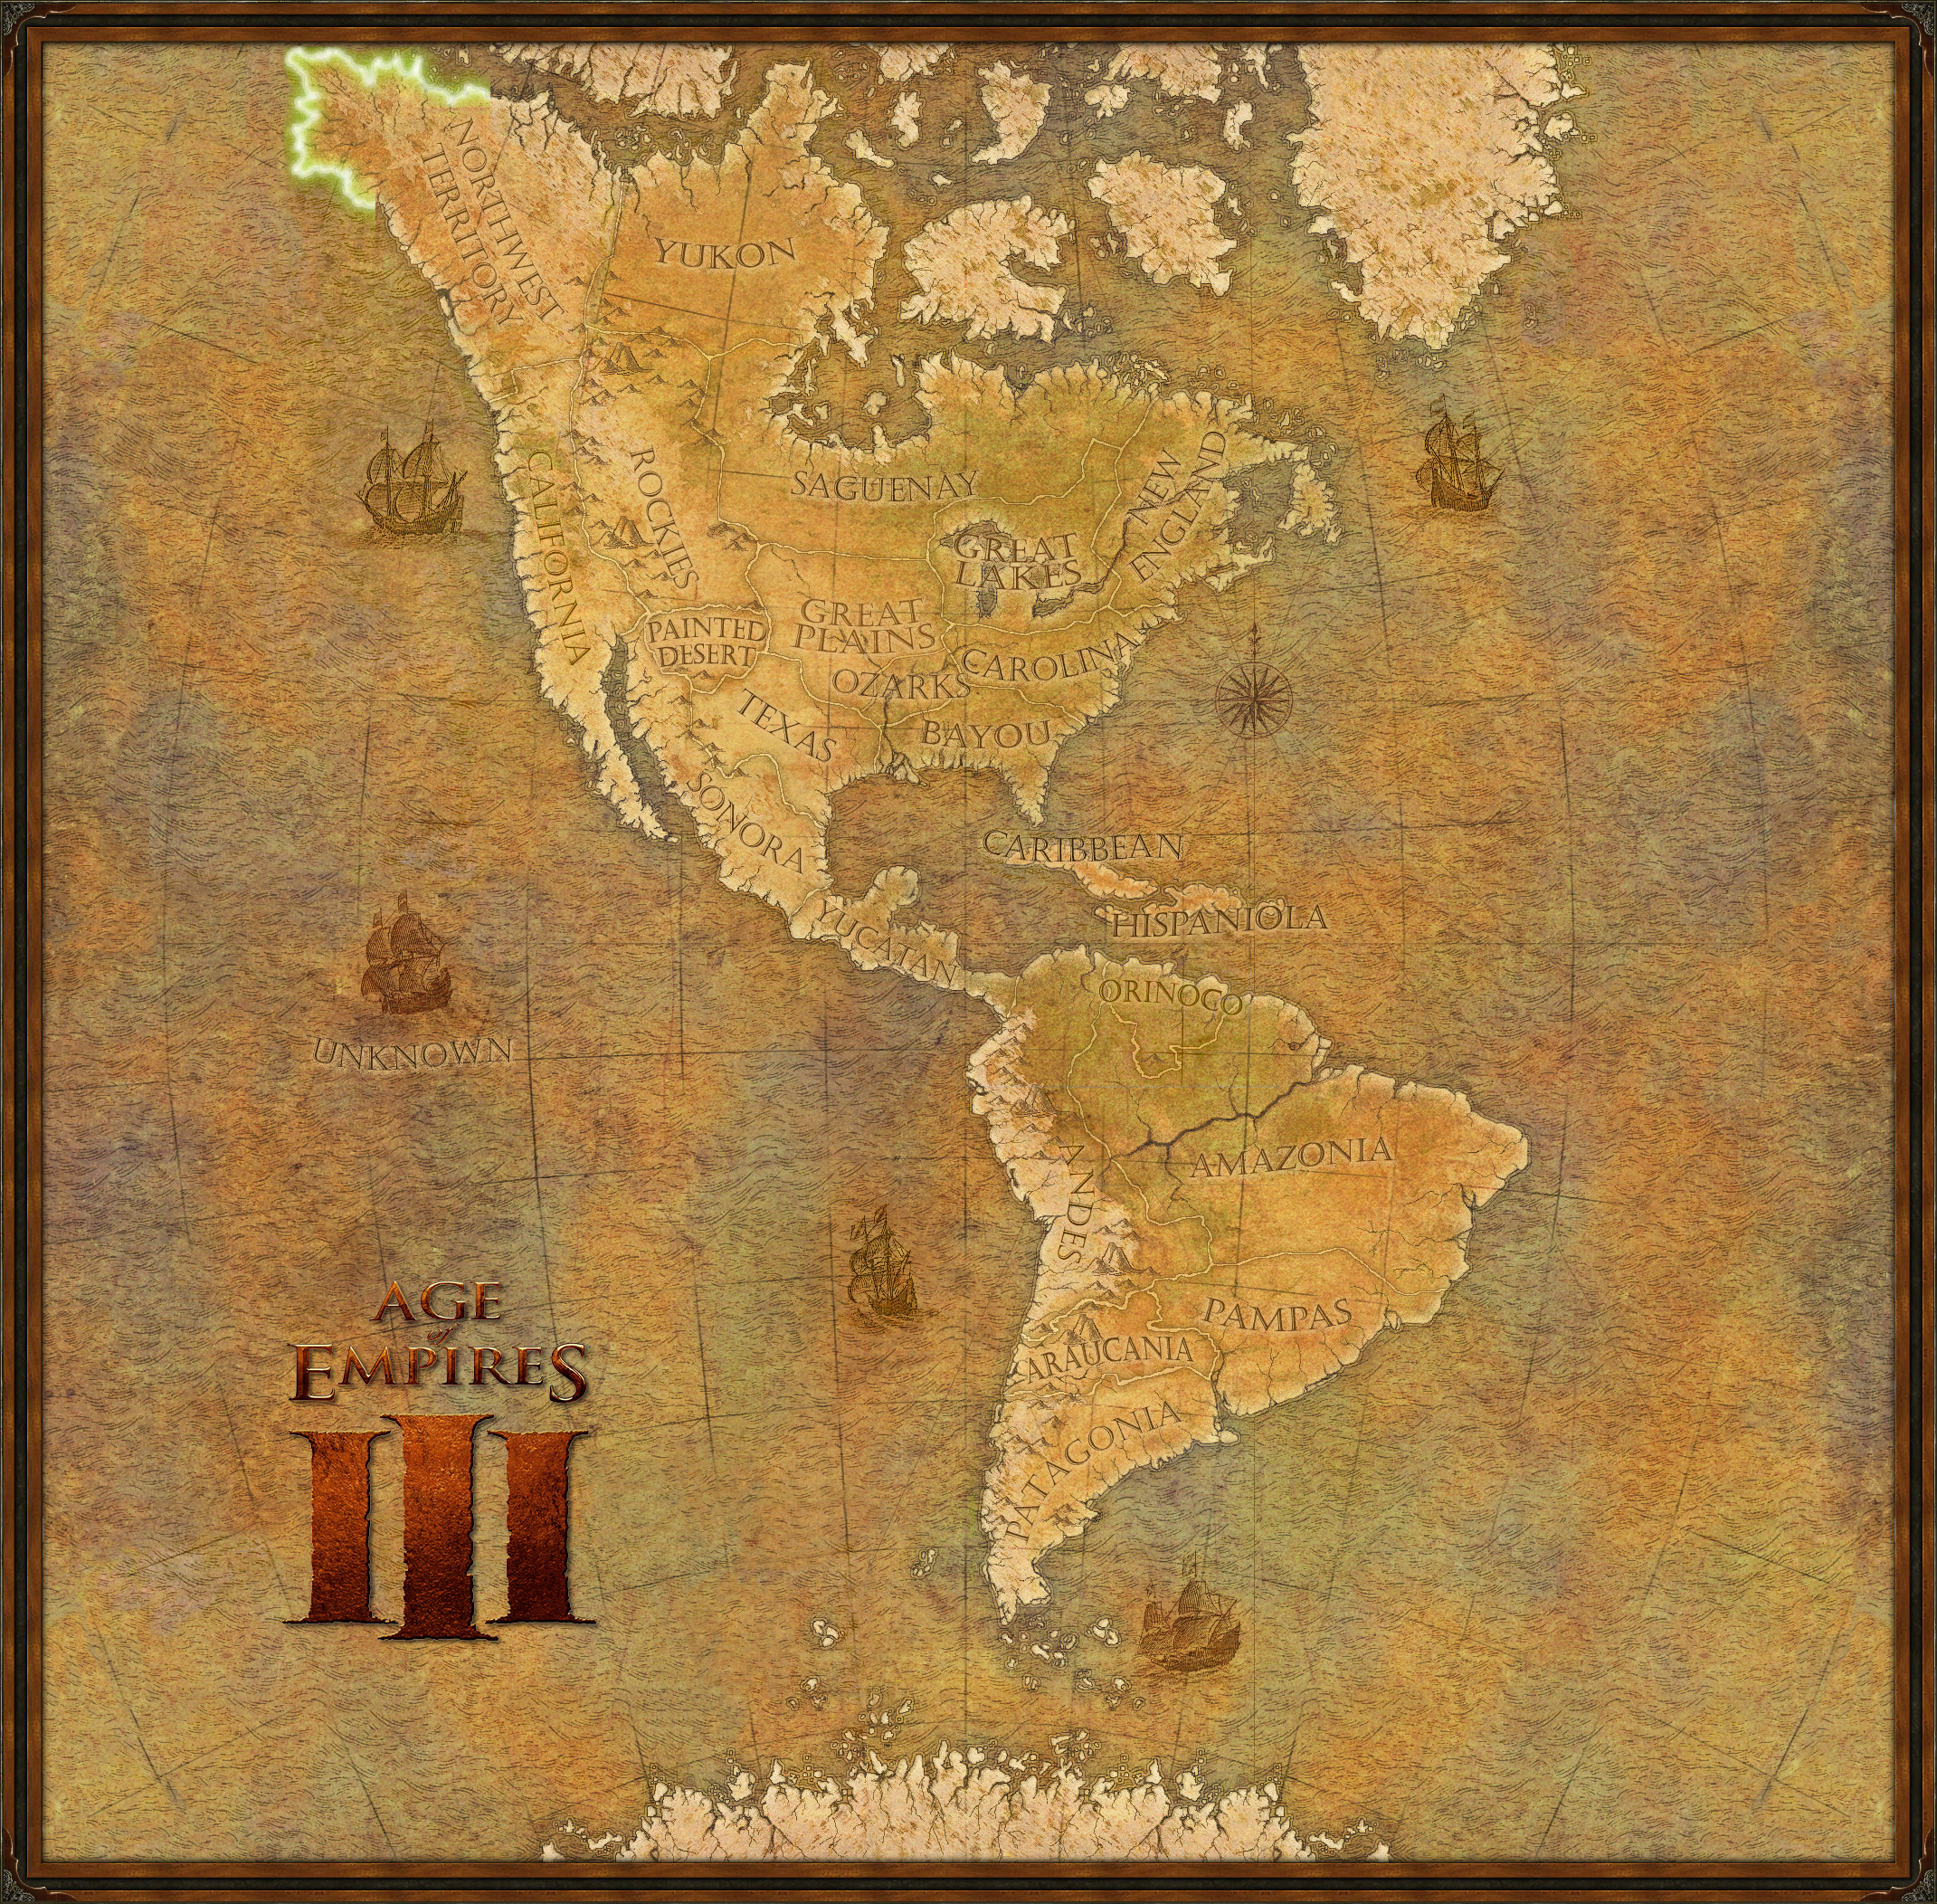 rome 2 resource map